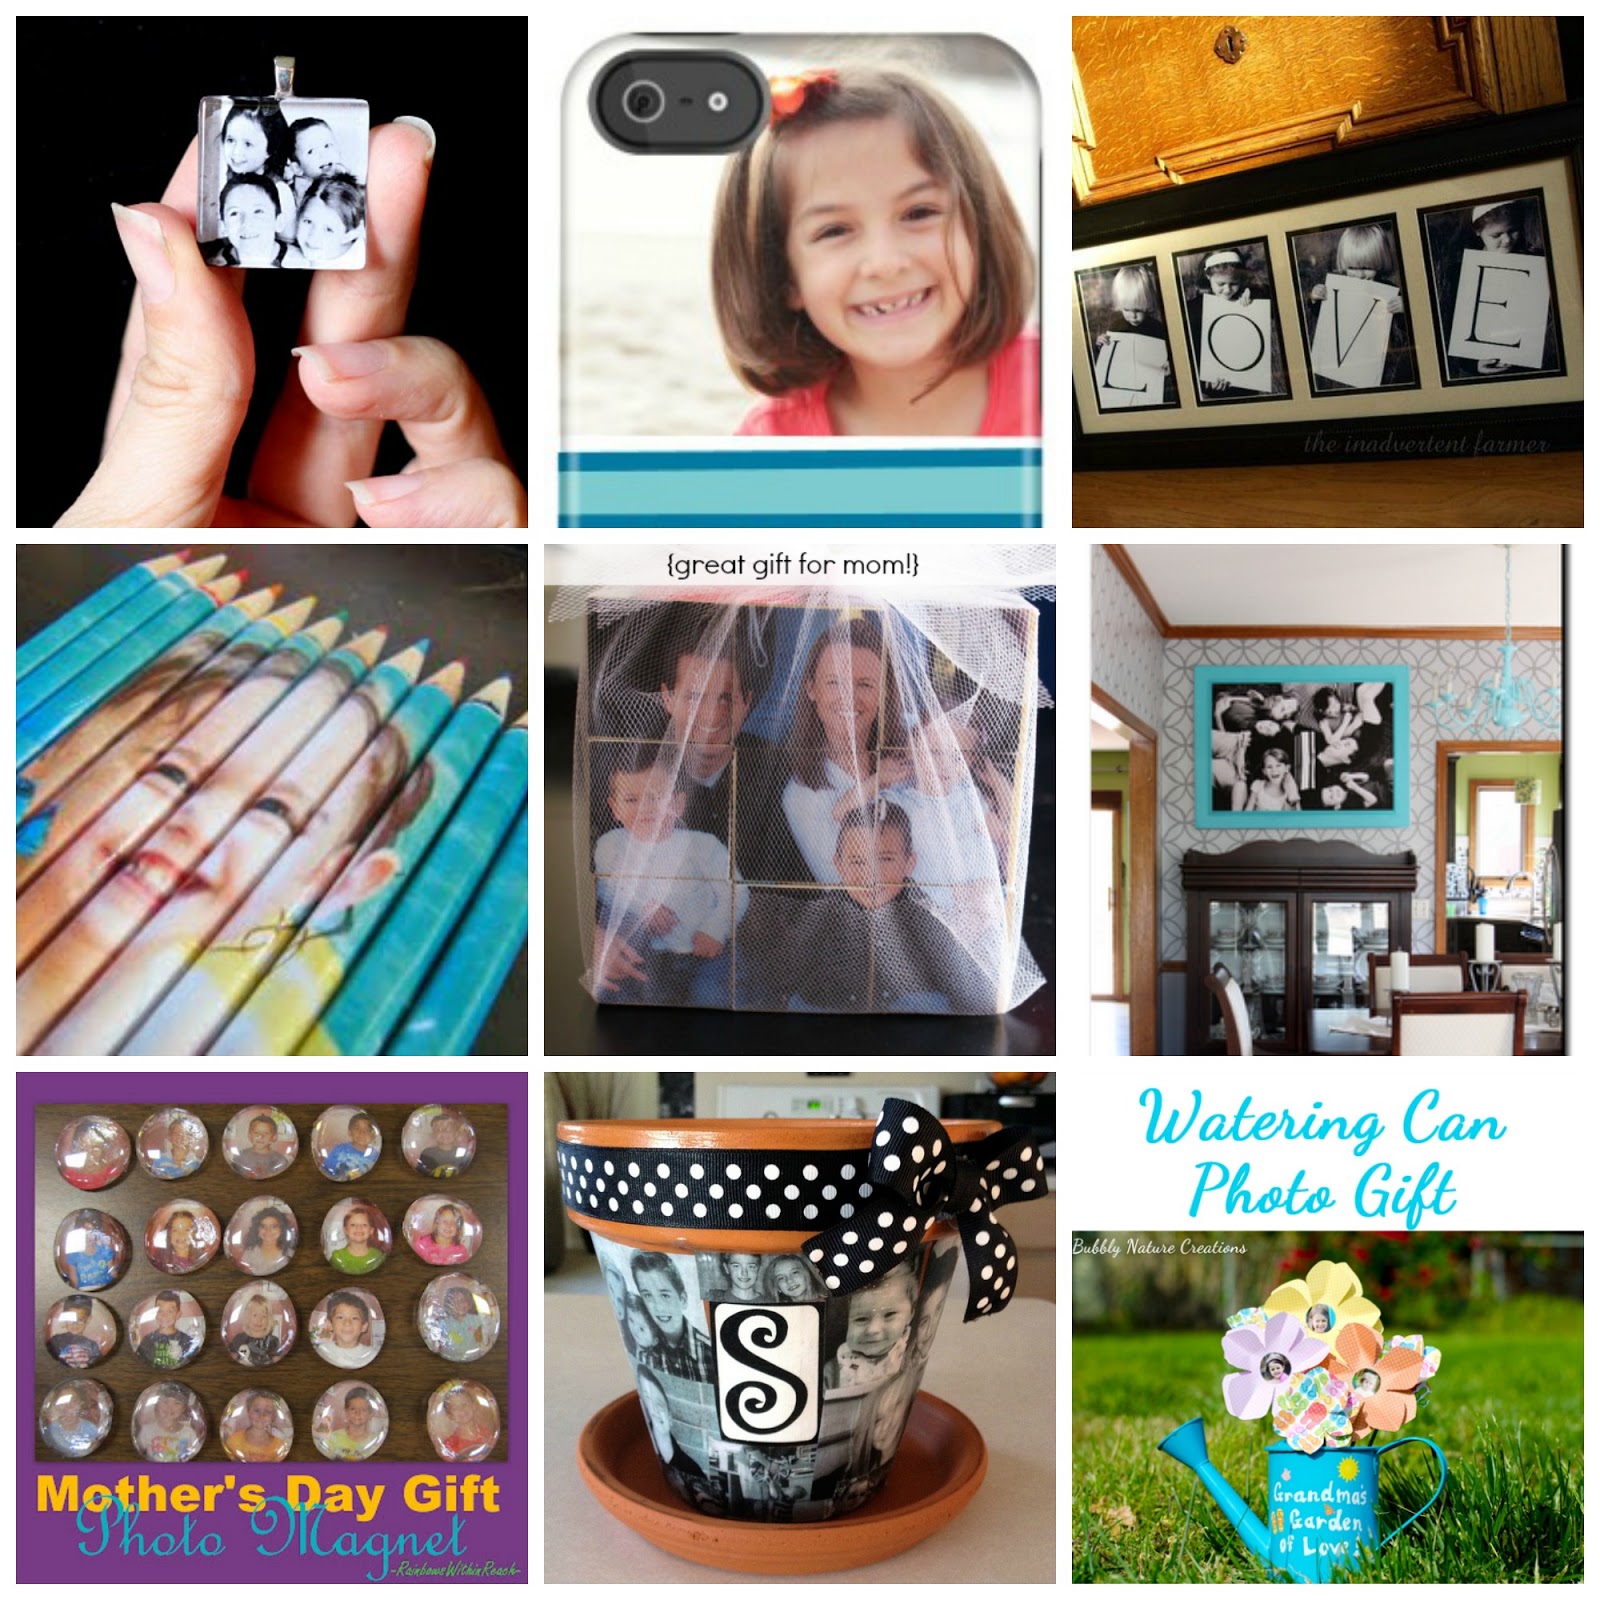 Mother's Day Photo Gift Ideas - Sugar Bee Crafts